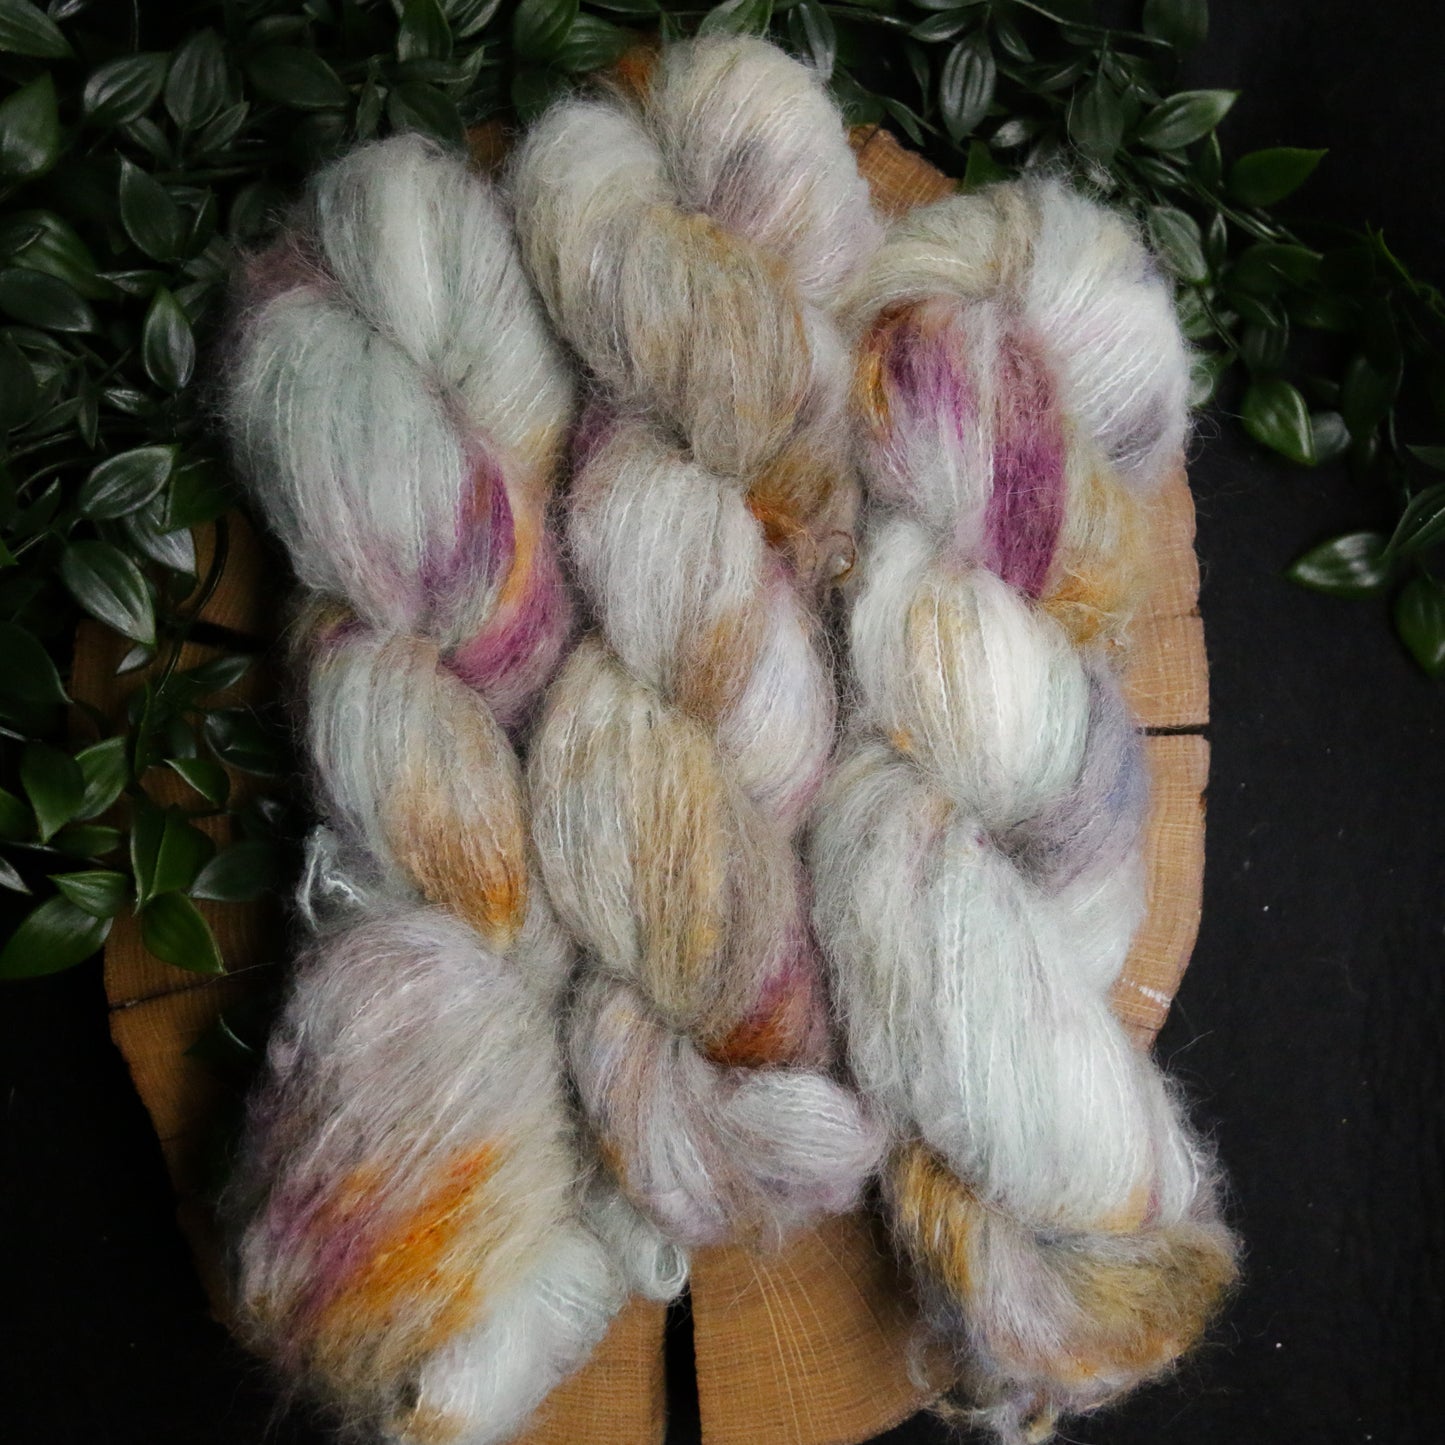 Overlander Mountain *Hippy Strings Exclusive* - Suri Alpaca Lace - Lace Weight